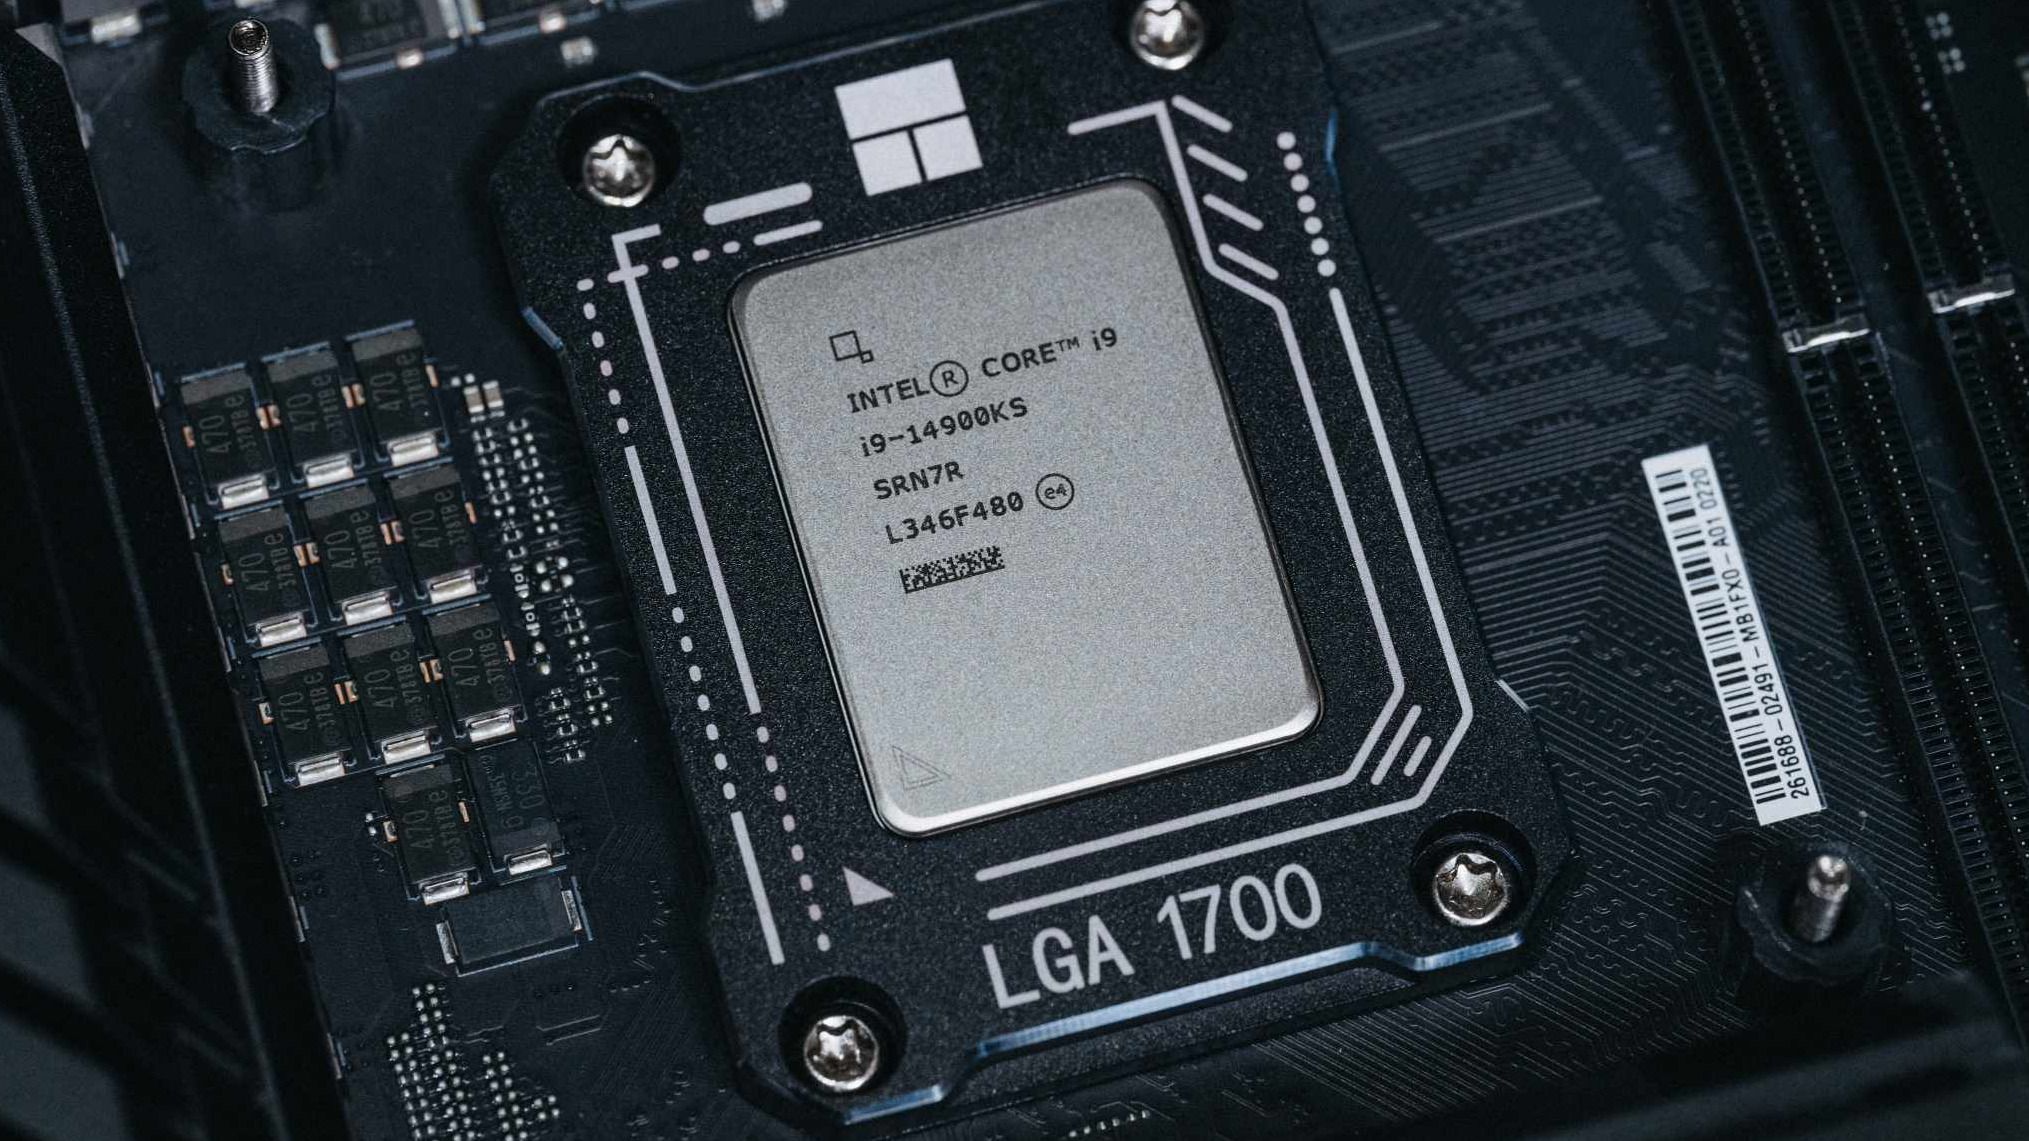 A rumored image of the Intel i9-14000KS